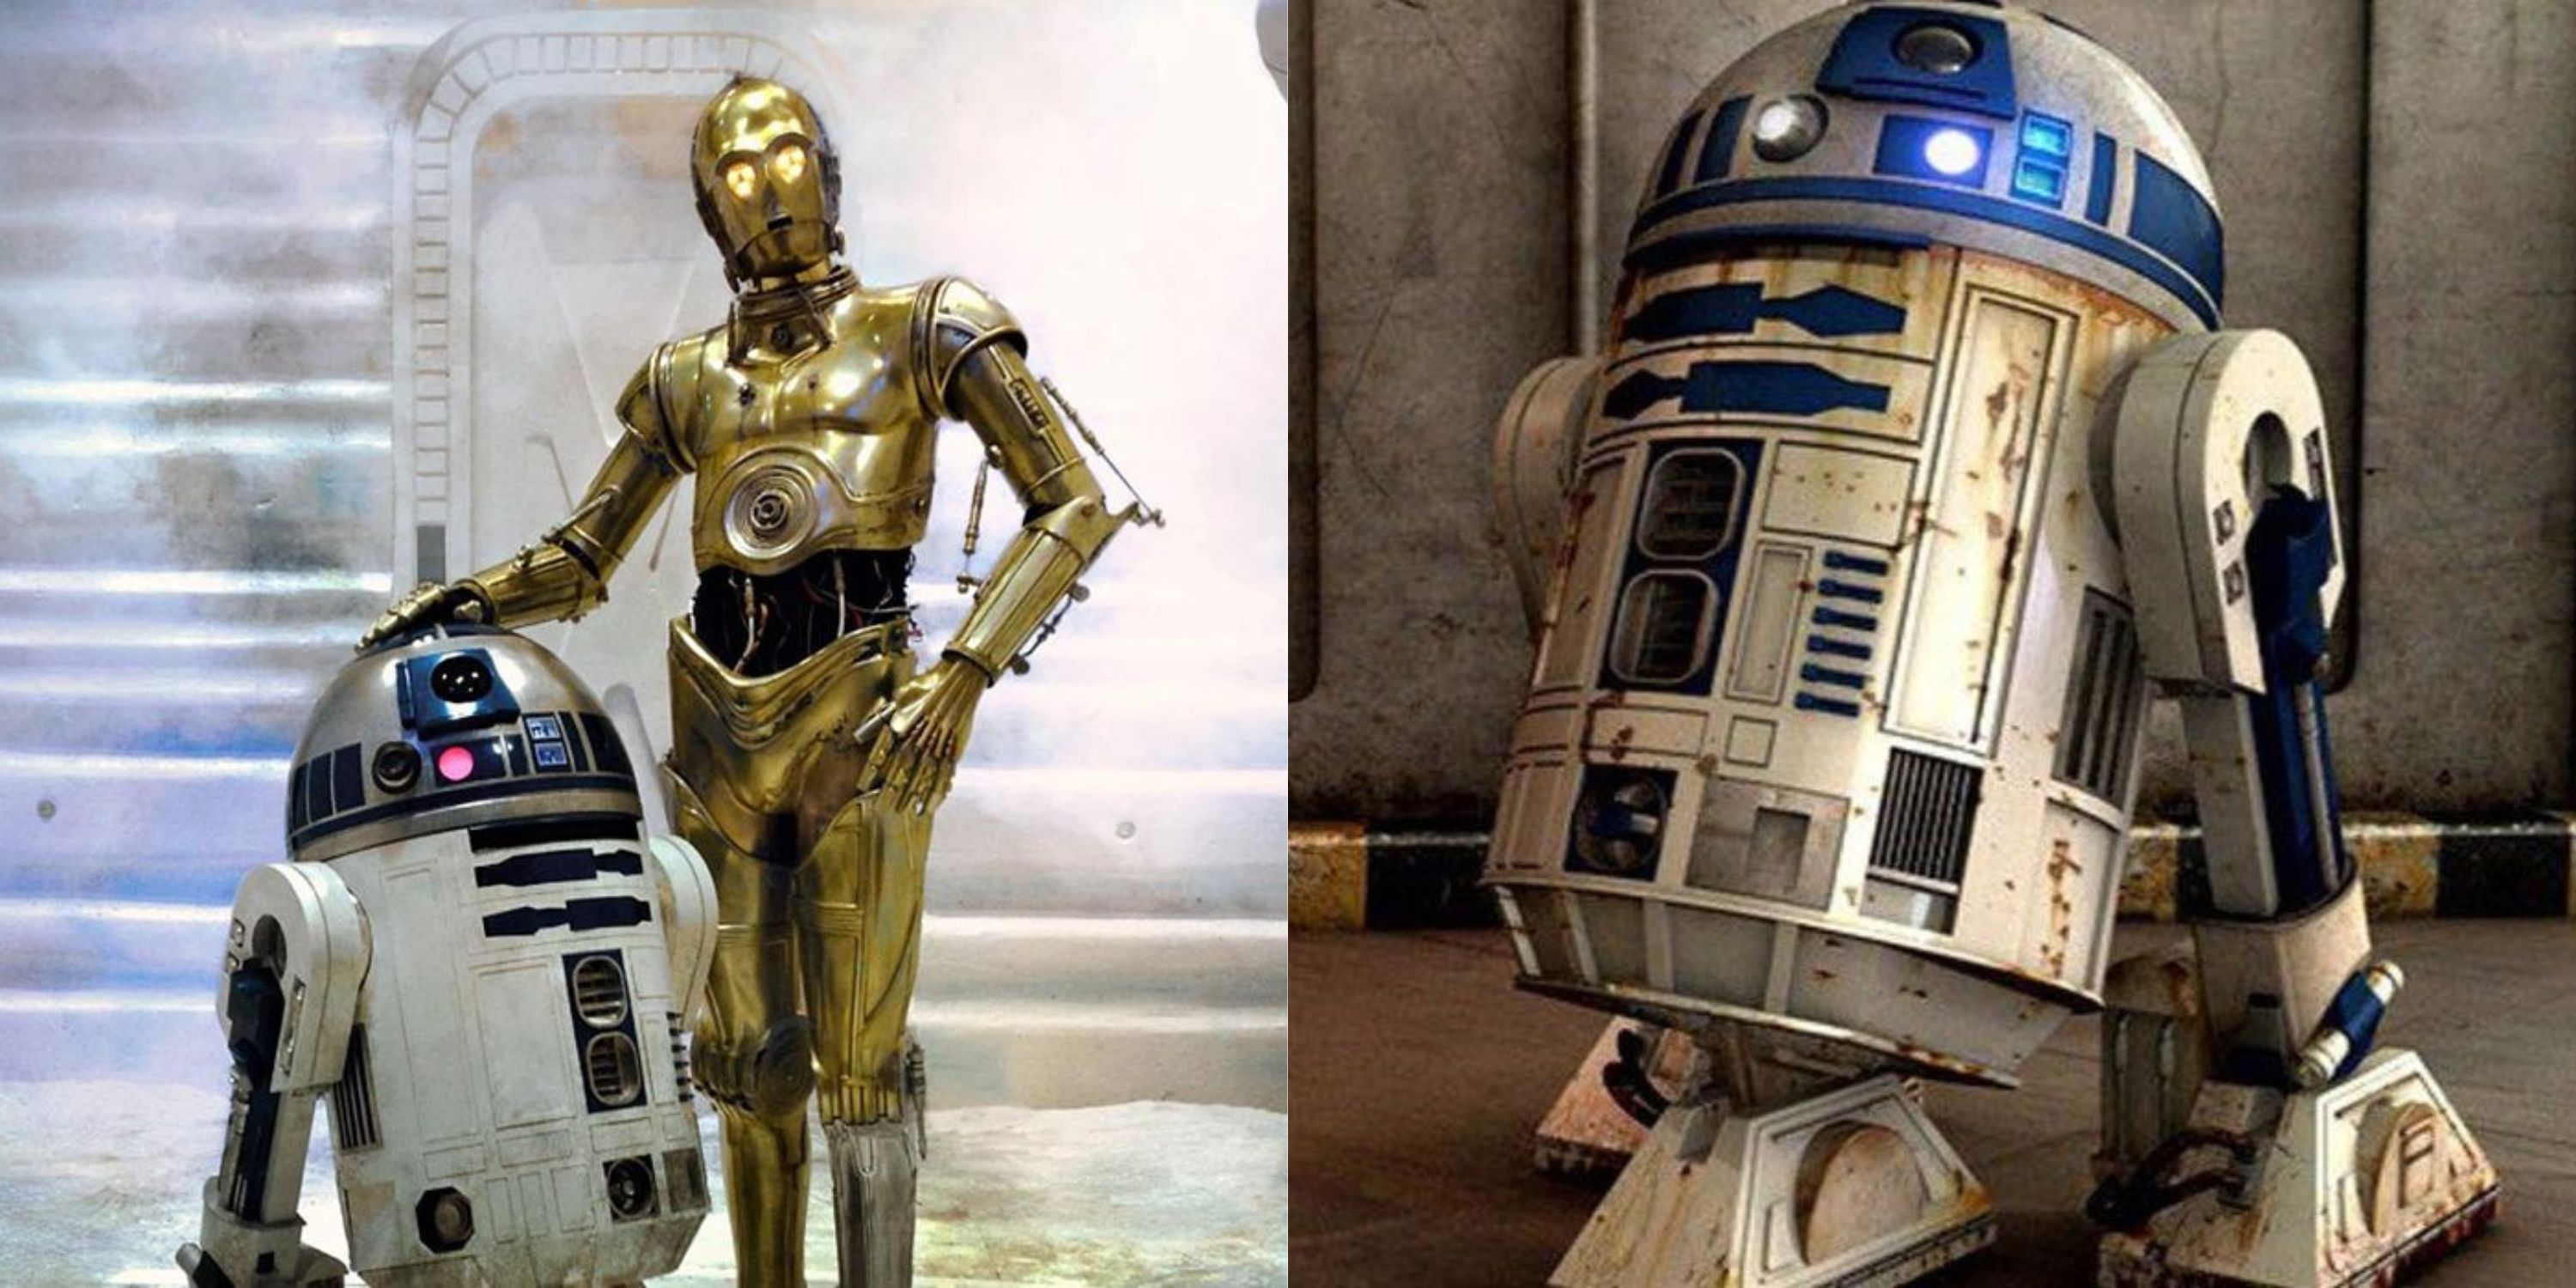 Featured image showing R2 D2 and C3PO in the Star Wars movies